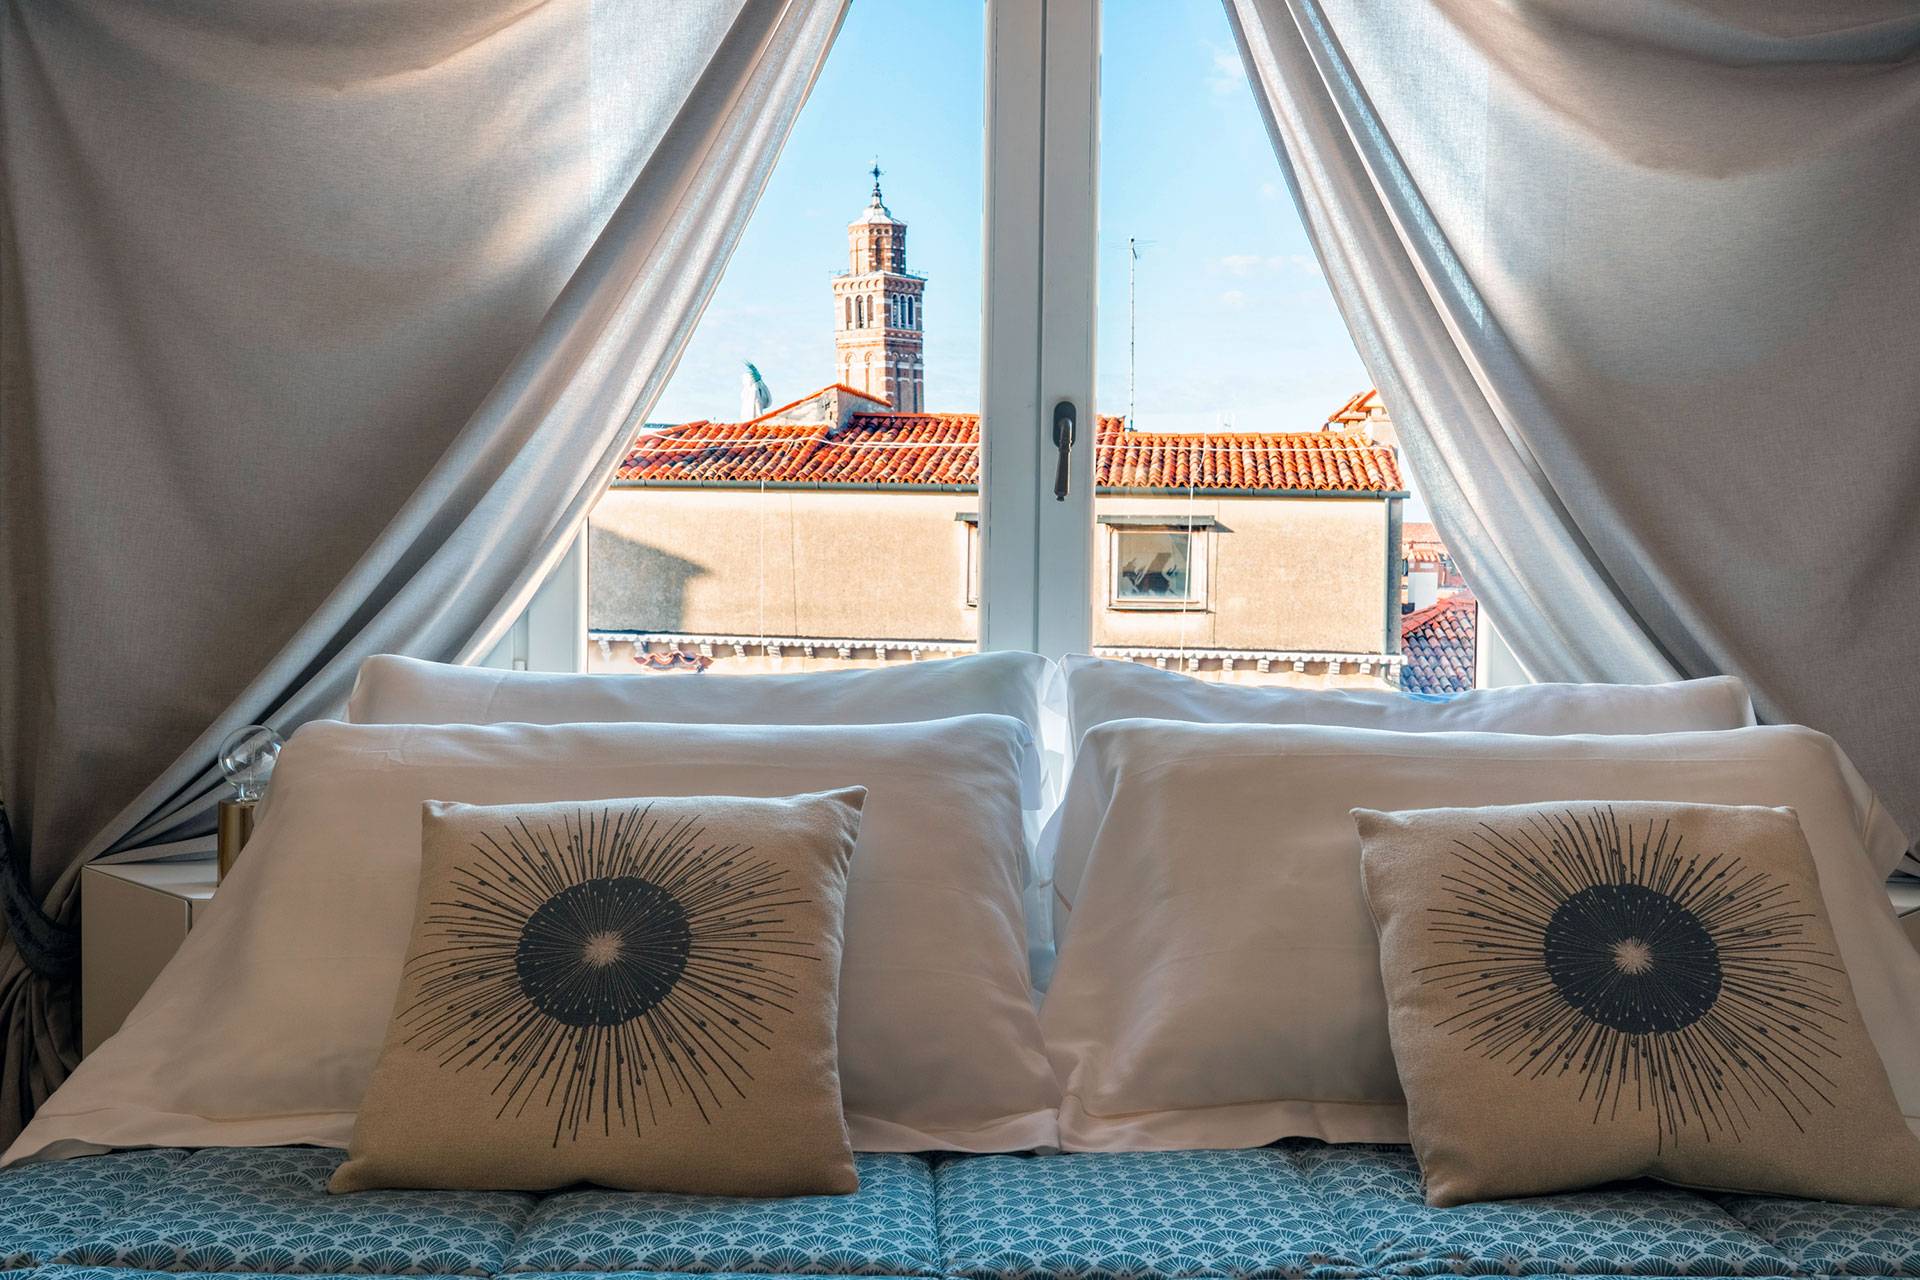 the window behind the king size bed offers a picturesque view of Venice rooftops